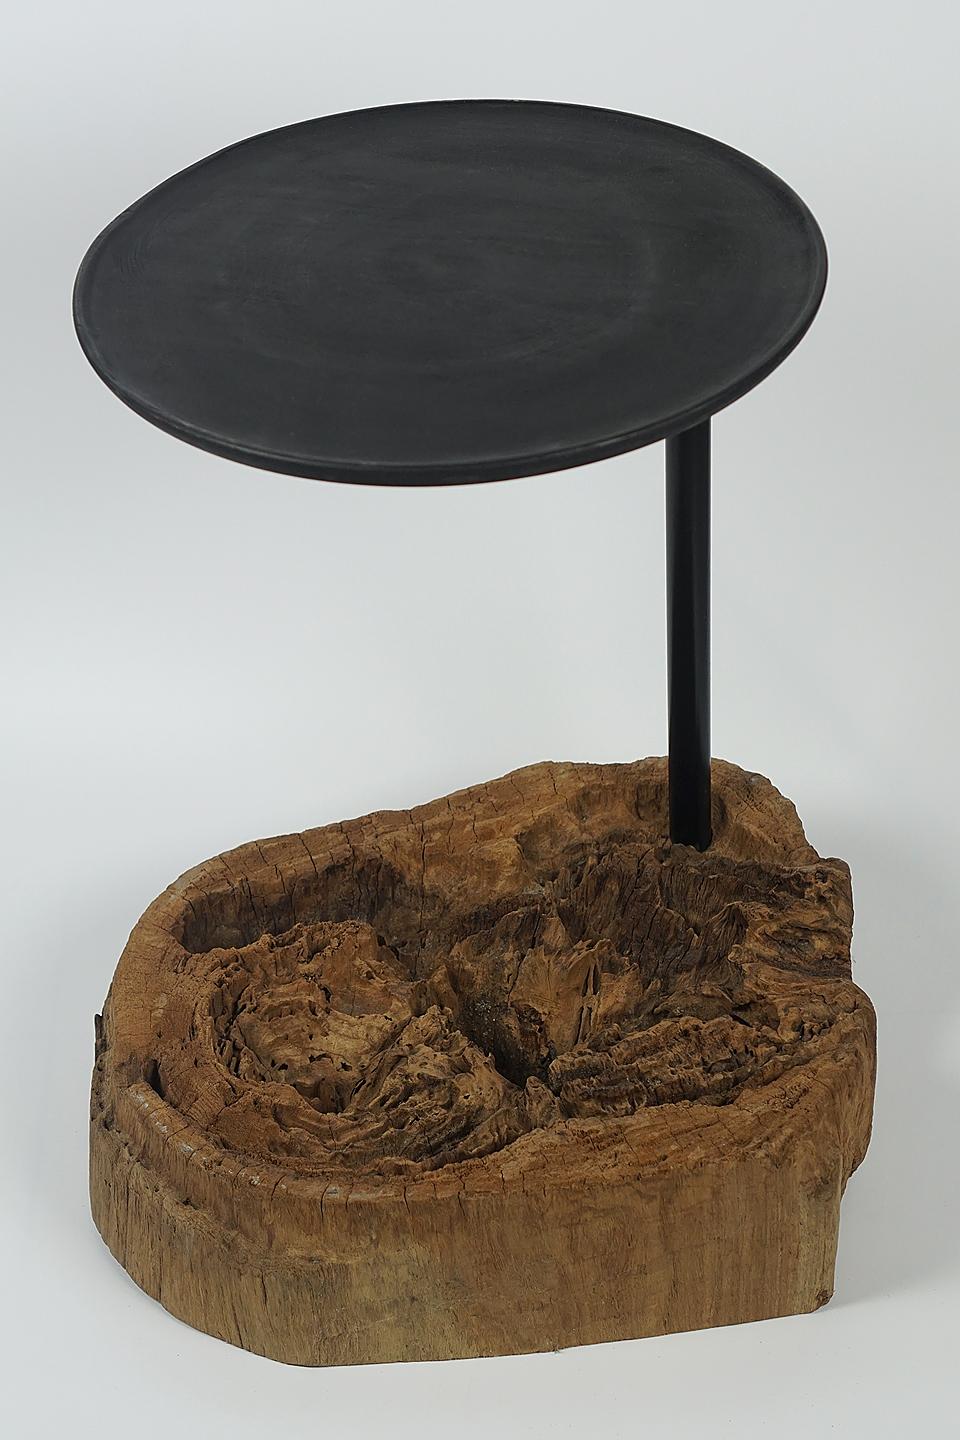 End table old erroded wood with an iron stick, a table top made of mango wood
Inhouse production (Designer Cocomaster).

Beautiful organic eroded wood, with a mango wood plate on an iron stick. 
The foot was made of old eroded wood.